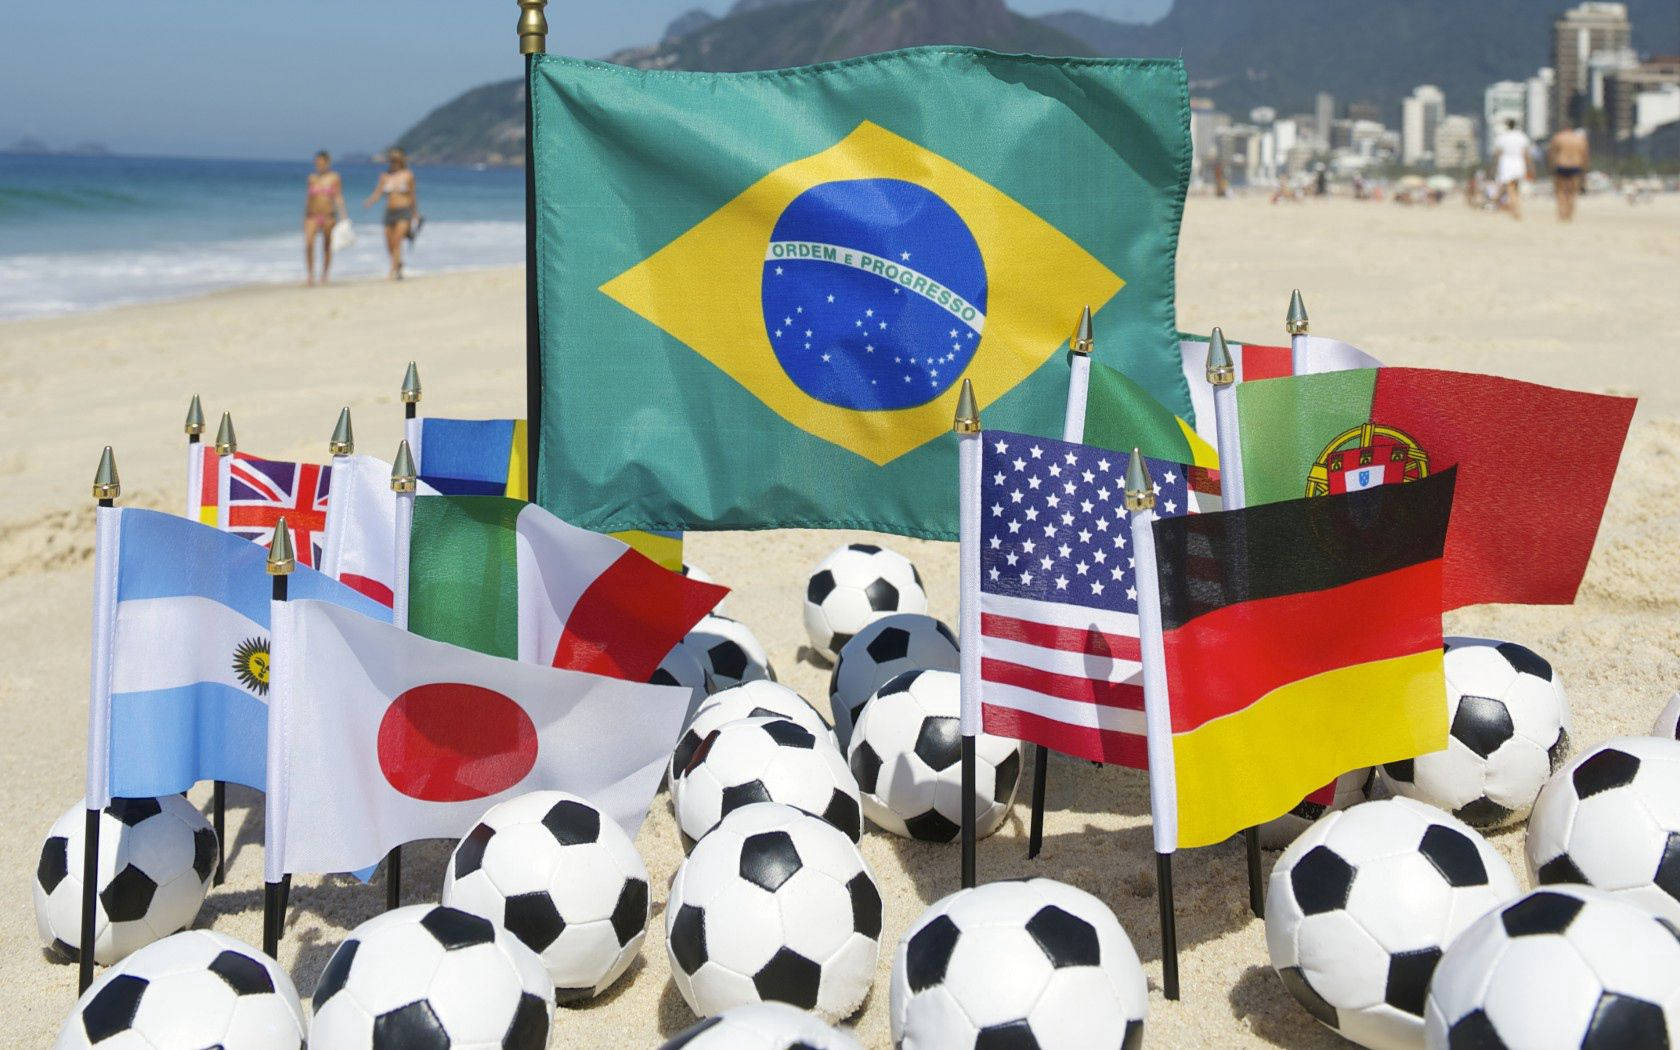 Celebrate the 2014 FIFA World Cup with flags from around the world Wallpaper